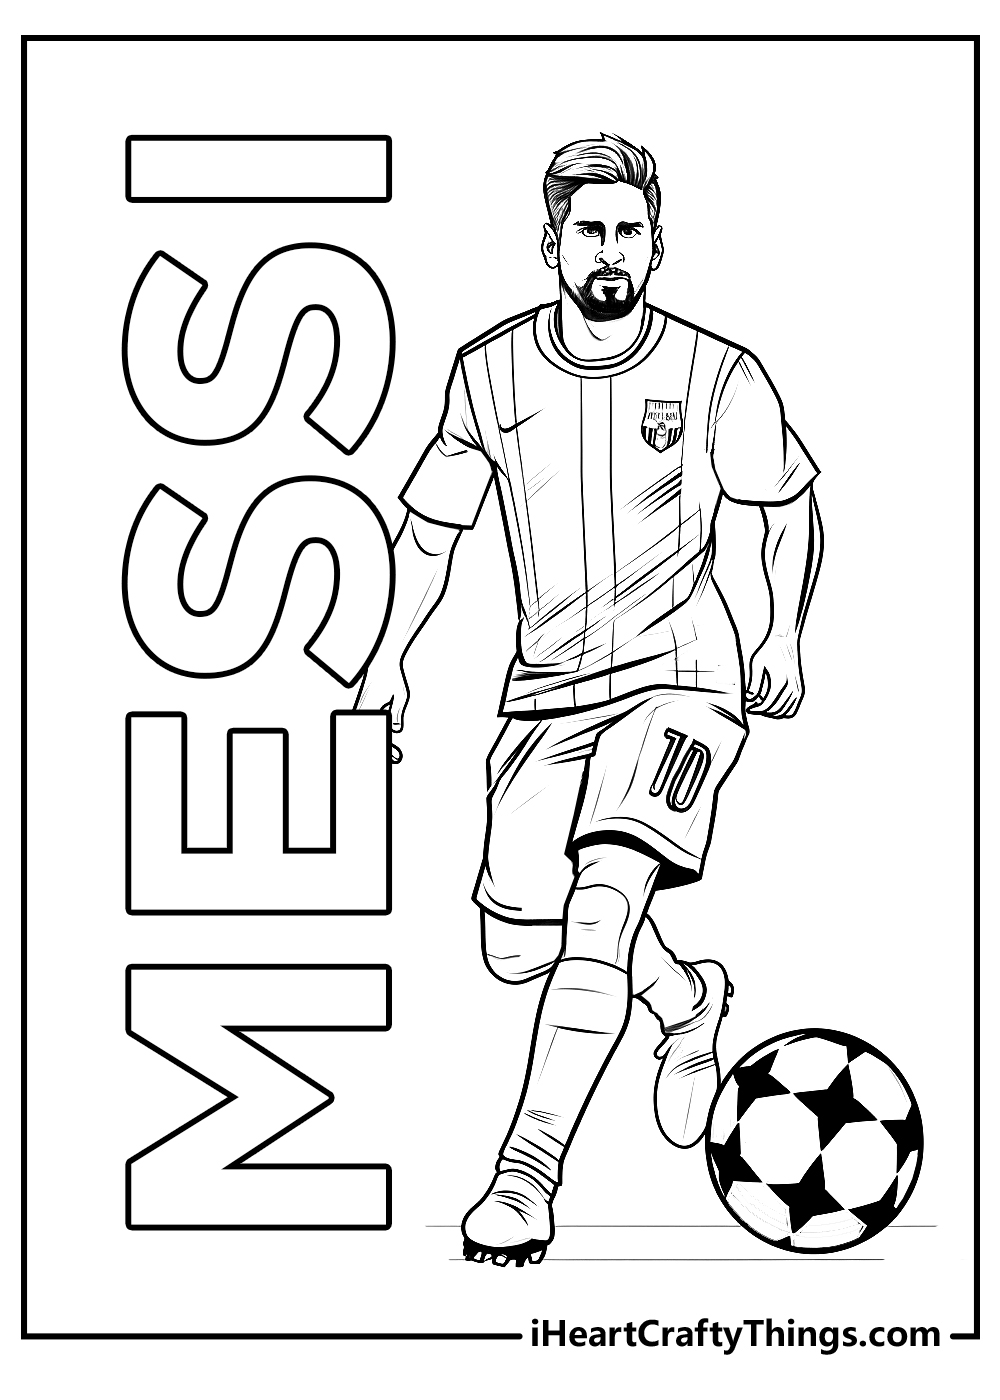 Printable messi coloring pages updated